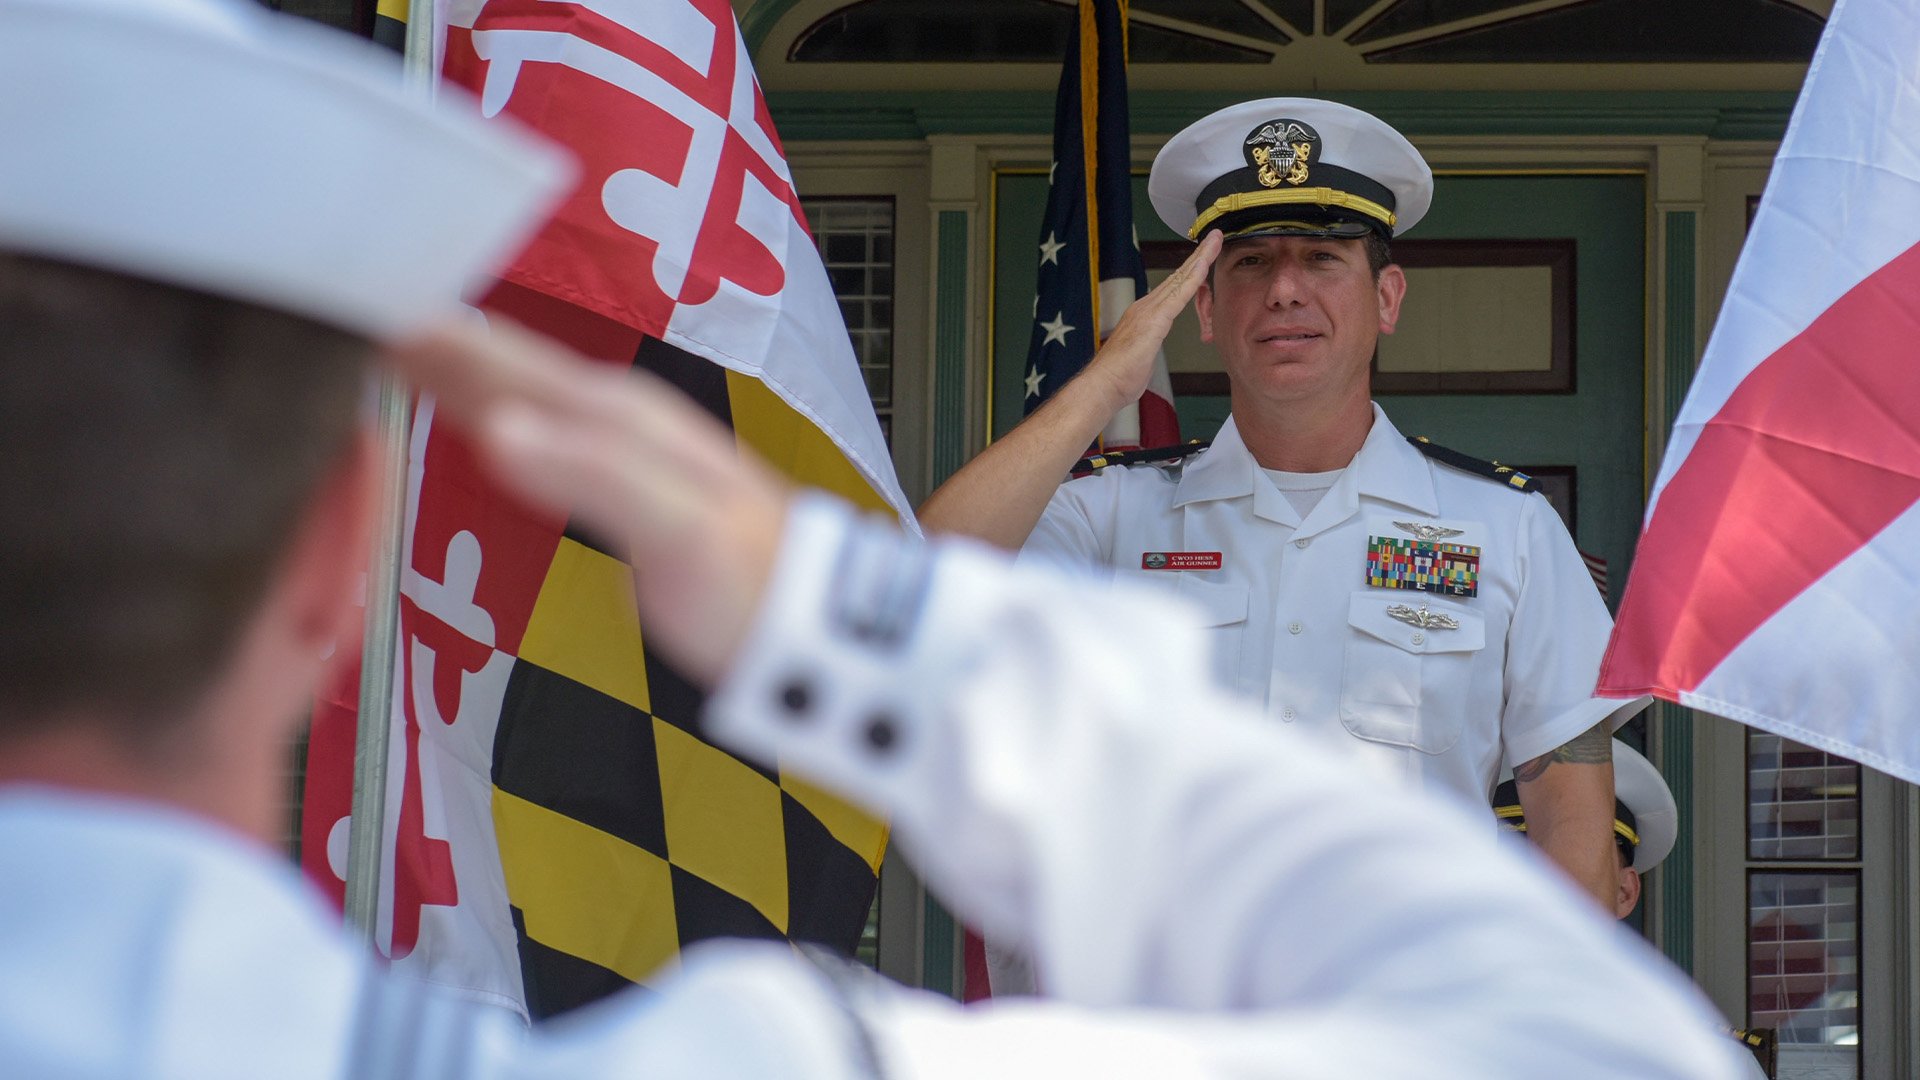 US Navy Chief Warrant Officer 3 Nicholas Hess, assigned to the aircraft carrier John C. Stennis, renders a salute at his retirement ceremony, after 23 years of service, in Smithfield, Virginia, July 1, 2022. A glut in unprocessed DD-214s has led the Navy to issue DD-214 discharge forms that lack a sailor's signature, but the sea service wants government agencies, veterans' organizations, and employers to know that they're still valid separation documents. US Navy photo by Mass Communication Specialist 3rd Class Riley Gasdia.